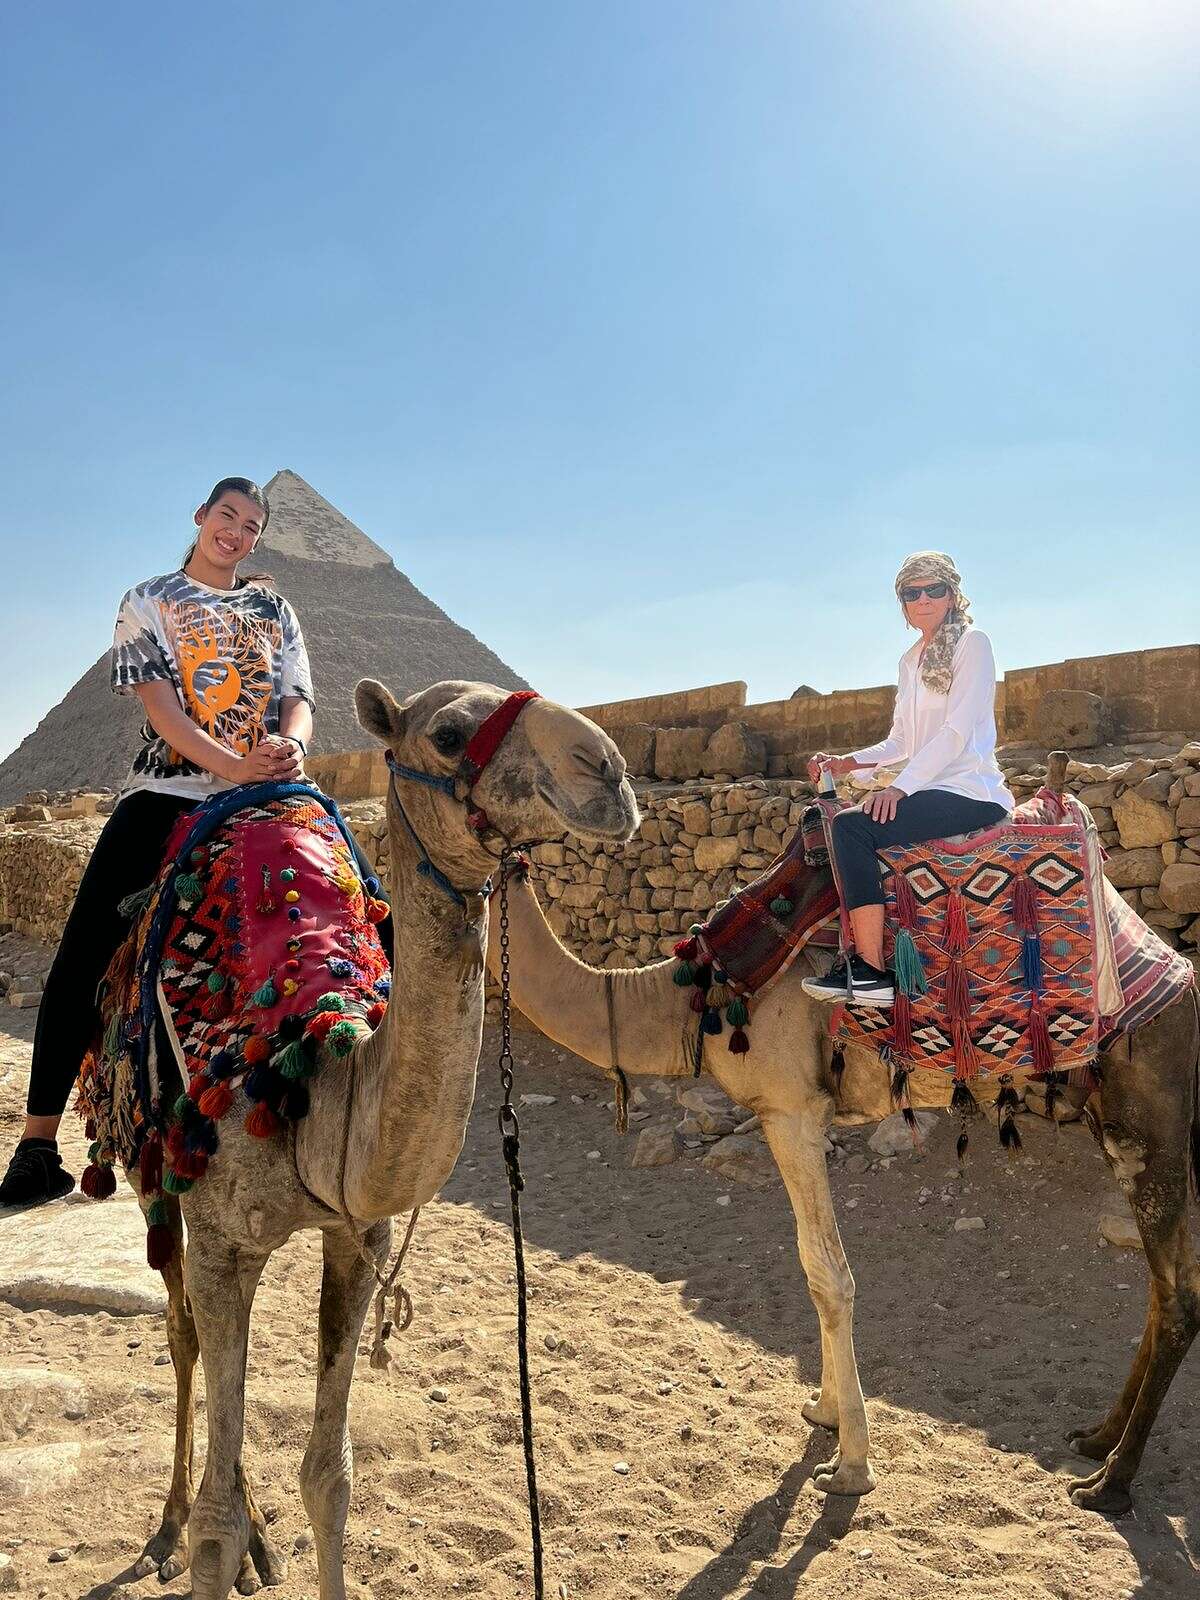 UConn women's basketball associate head coach Chris Dailey visited Jana El Alfy in Egypt. El Alfy gave Dailey a tour of the Pyramids and the two also rode camels together.